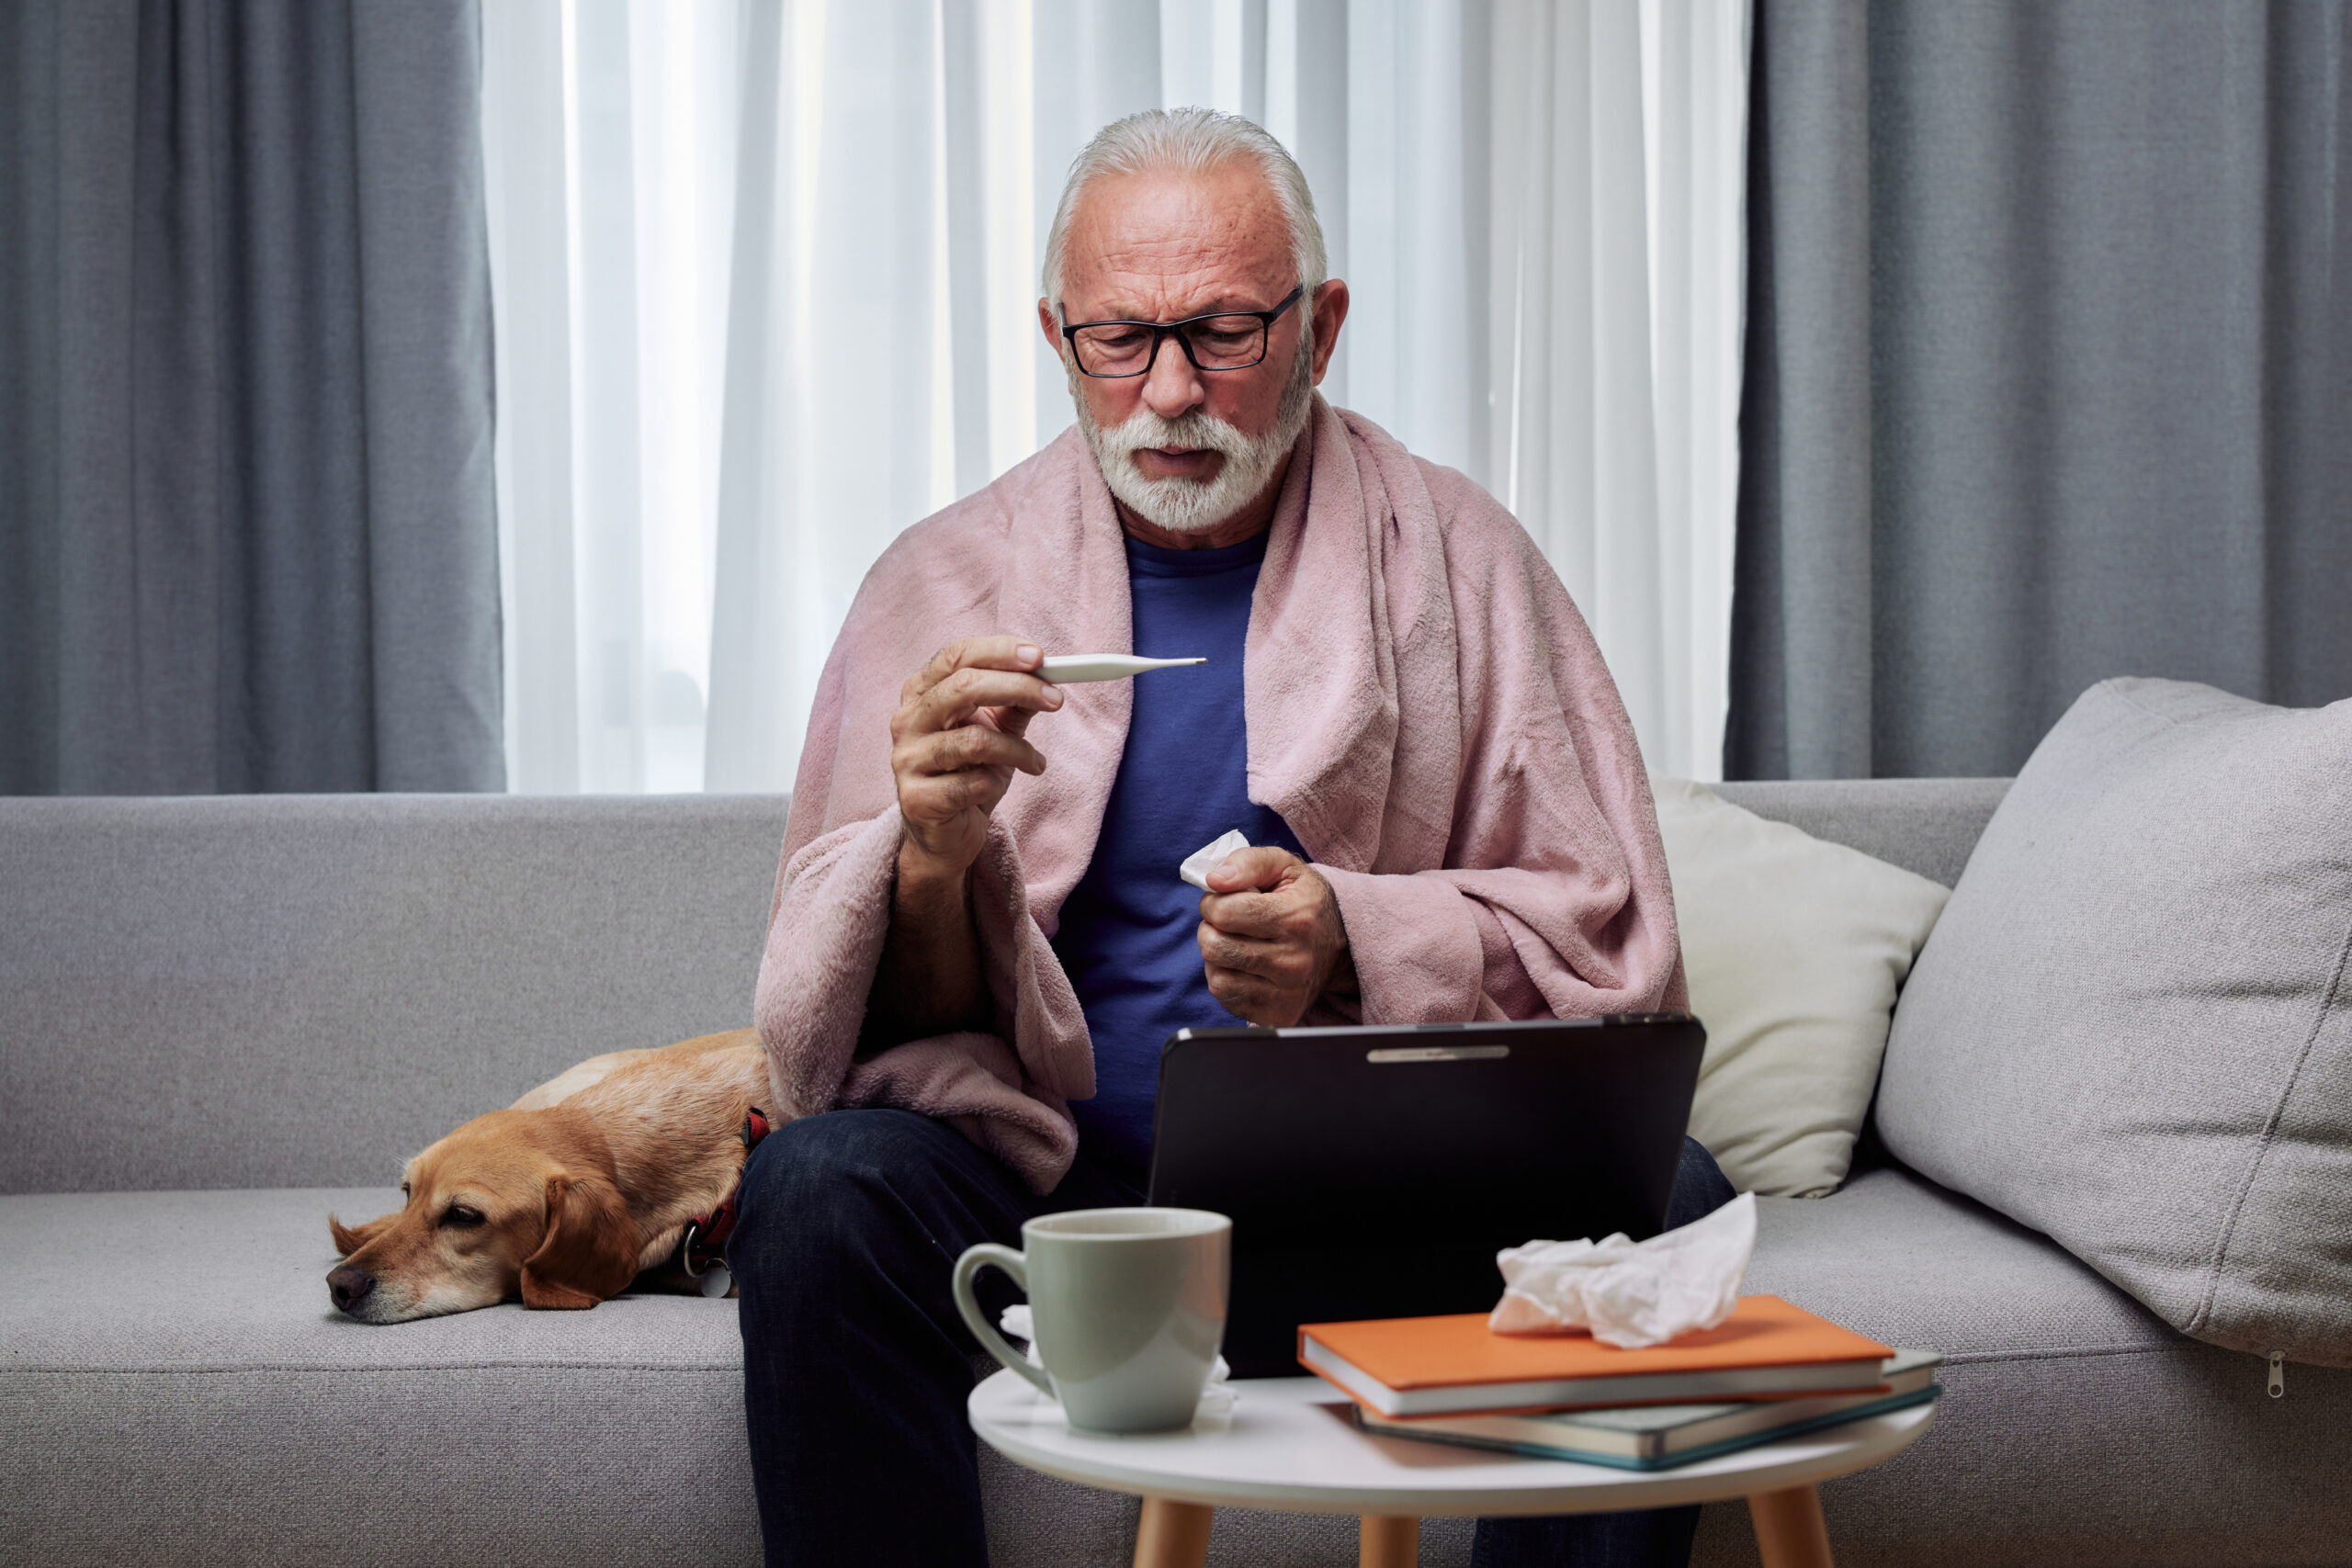 Sick elderly man checking his temperature suffering from seasonal flu or cold and using tablet for entertainment or online doctor consultation. Ill senior feel unhealthy with influenza at home